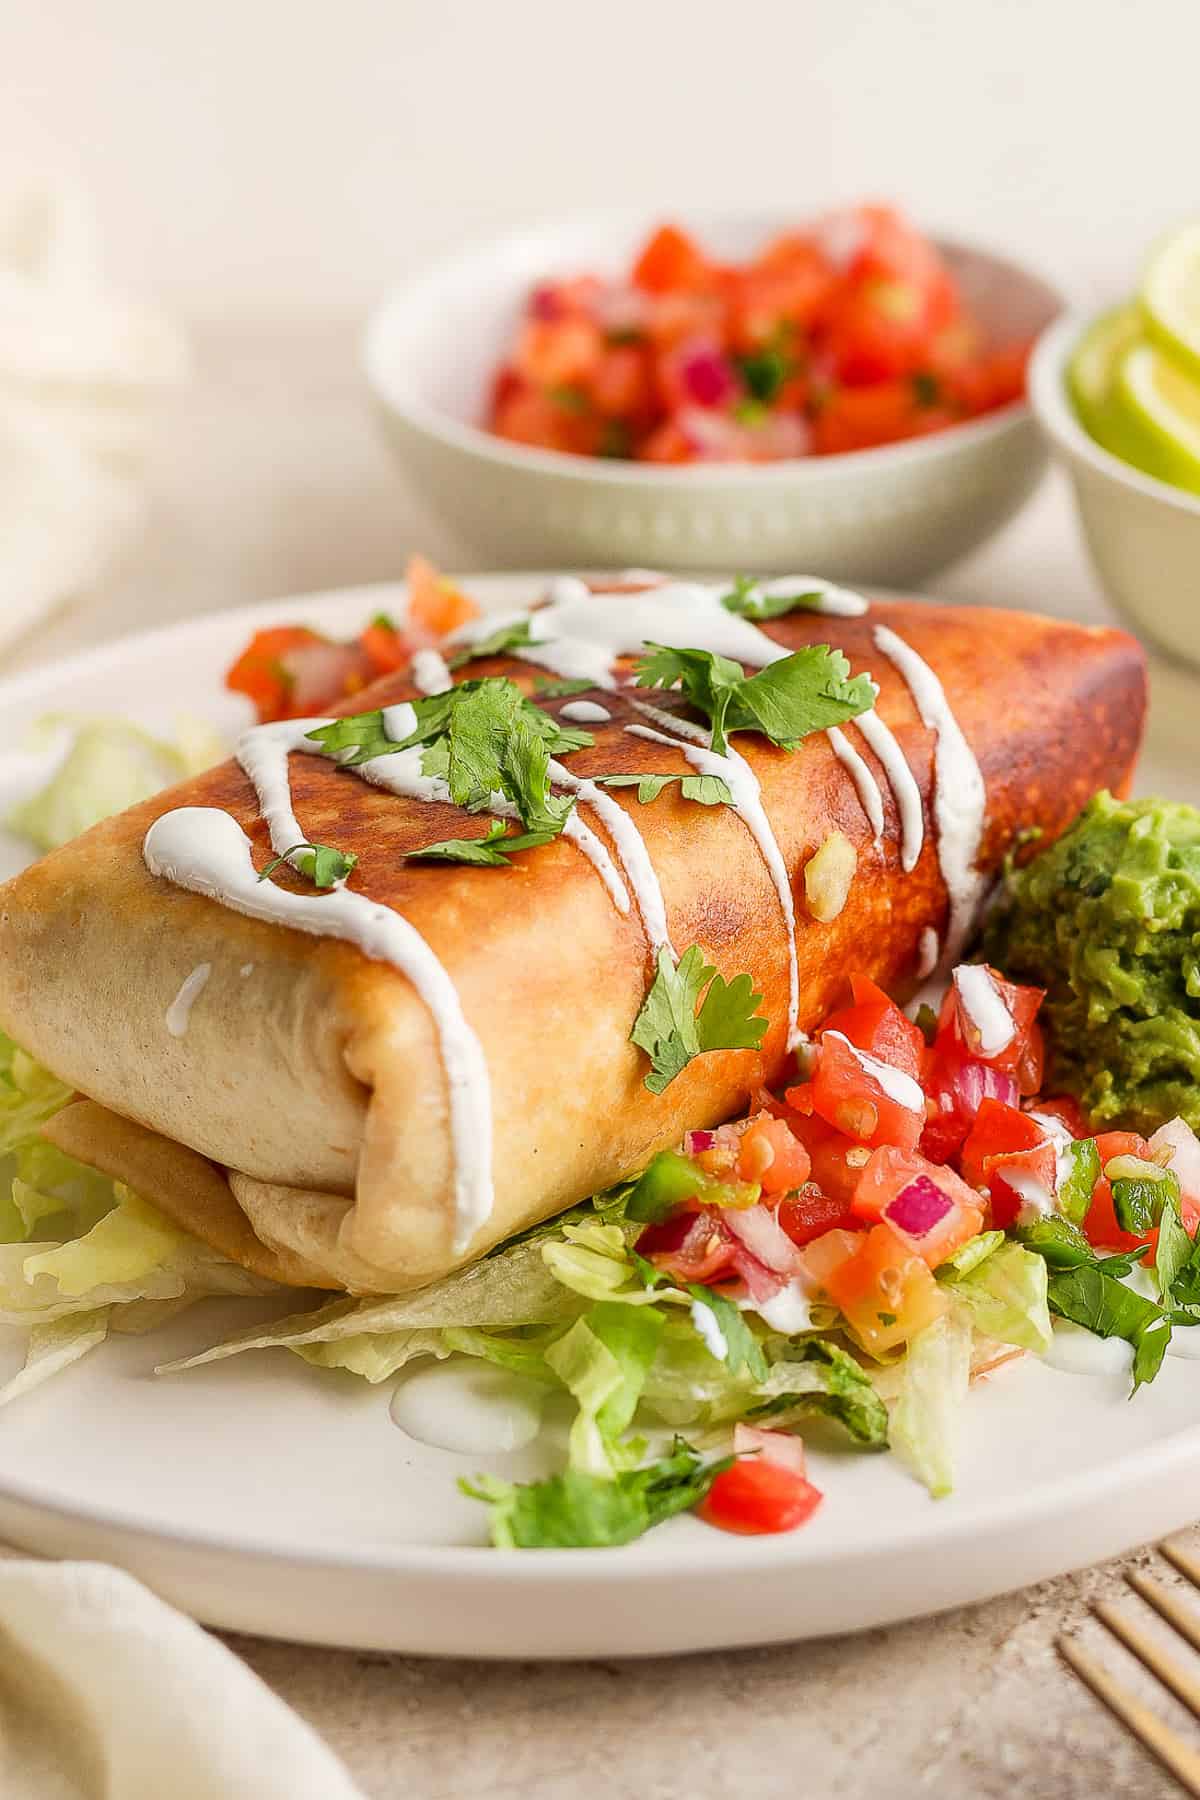 A chicken chimichanga on a bed of shredded lettuce drizzled with mexican crema and served with gucamole and pico de gallo.